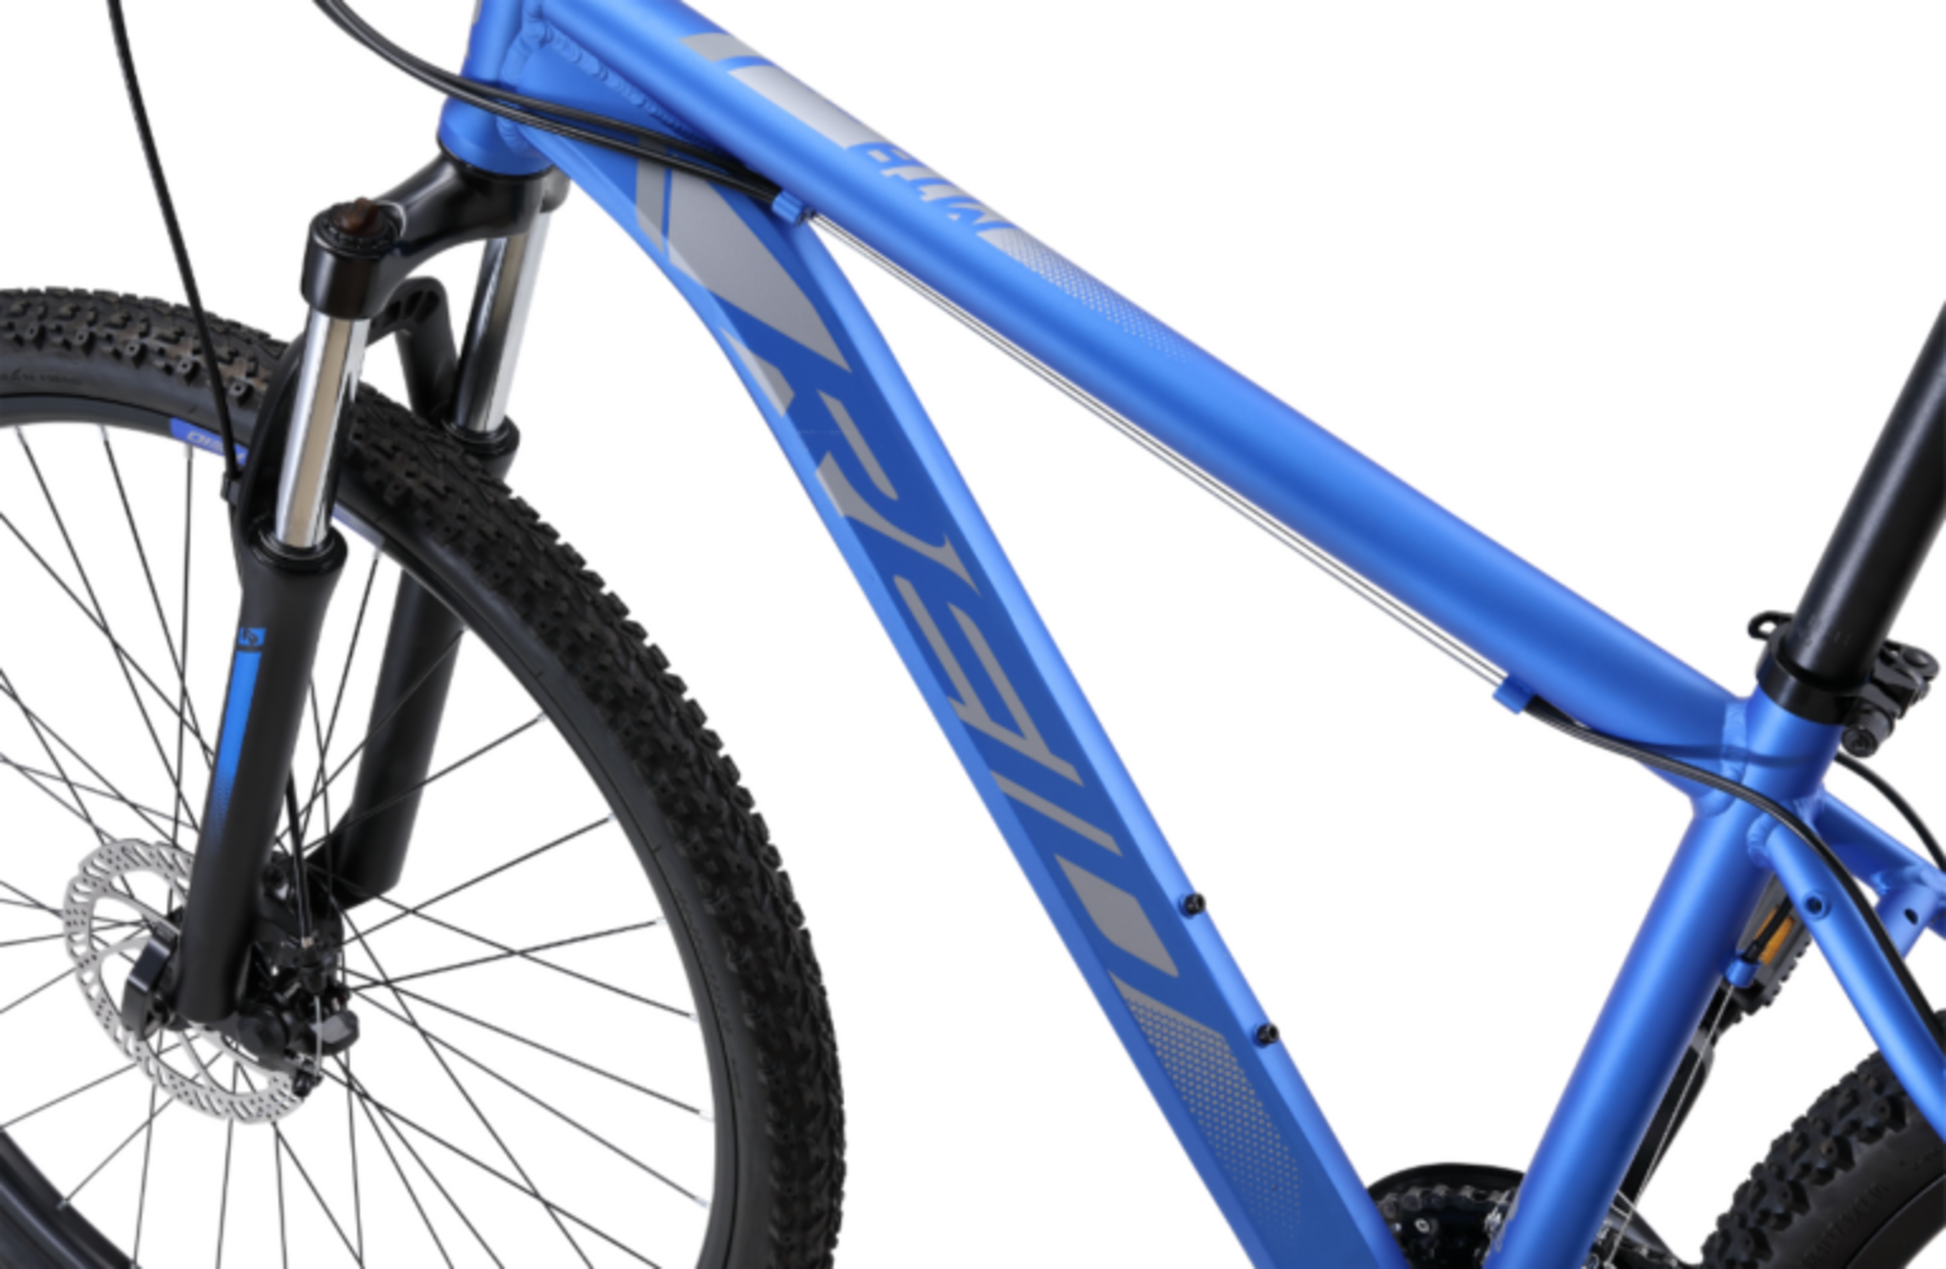 The MTB Pro 27.5" Disc Mountain Bike in Matte Blue showing the bike frame and mtb geometry from Reid Cycles Australia